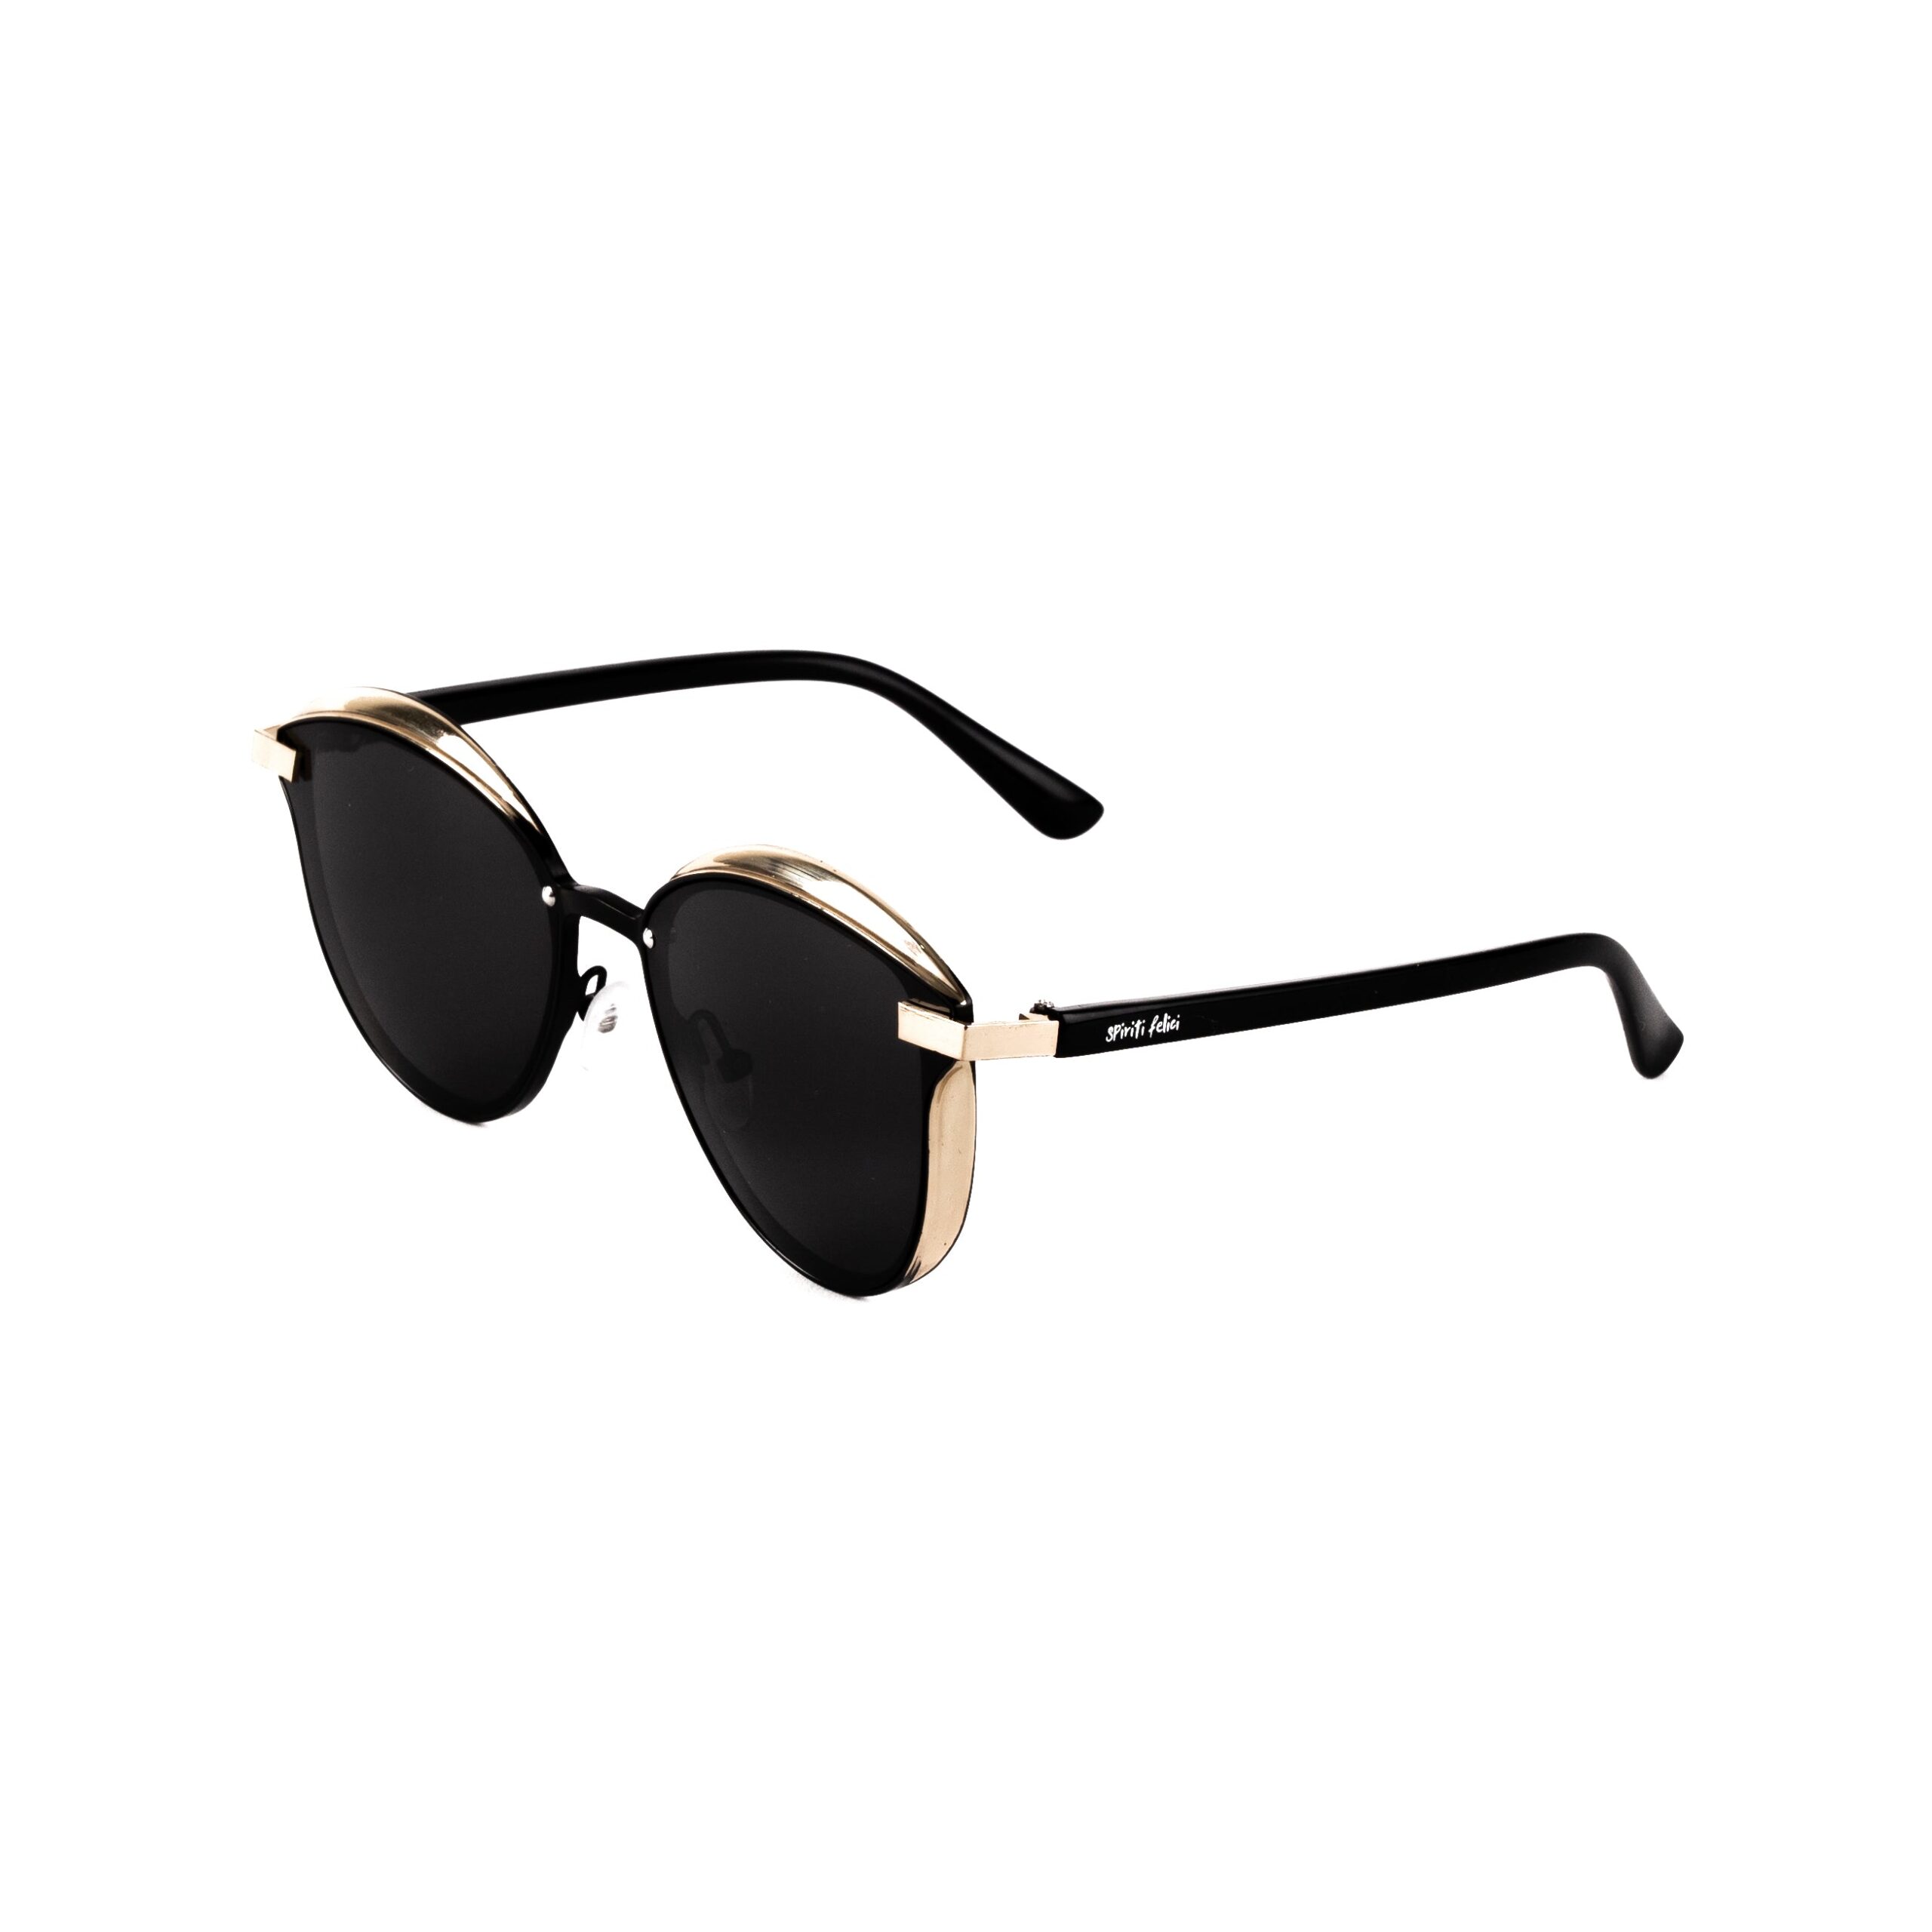 Buy OUTLOOK Sunglasses from Spiriti Felici available online at VEND. Explore more product category collections now